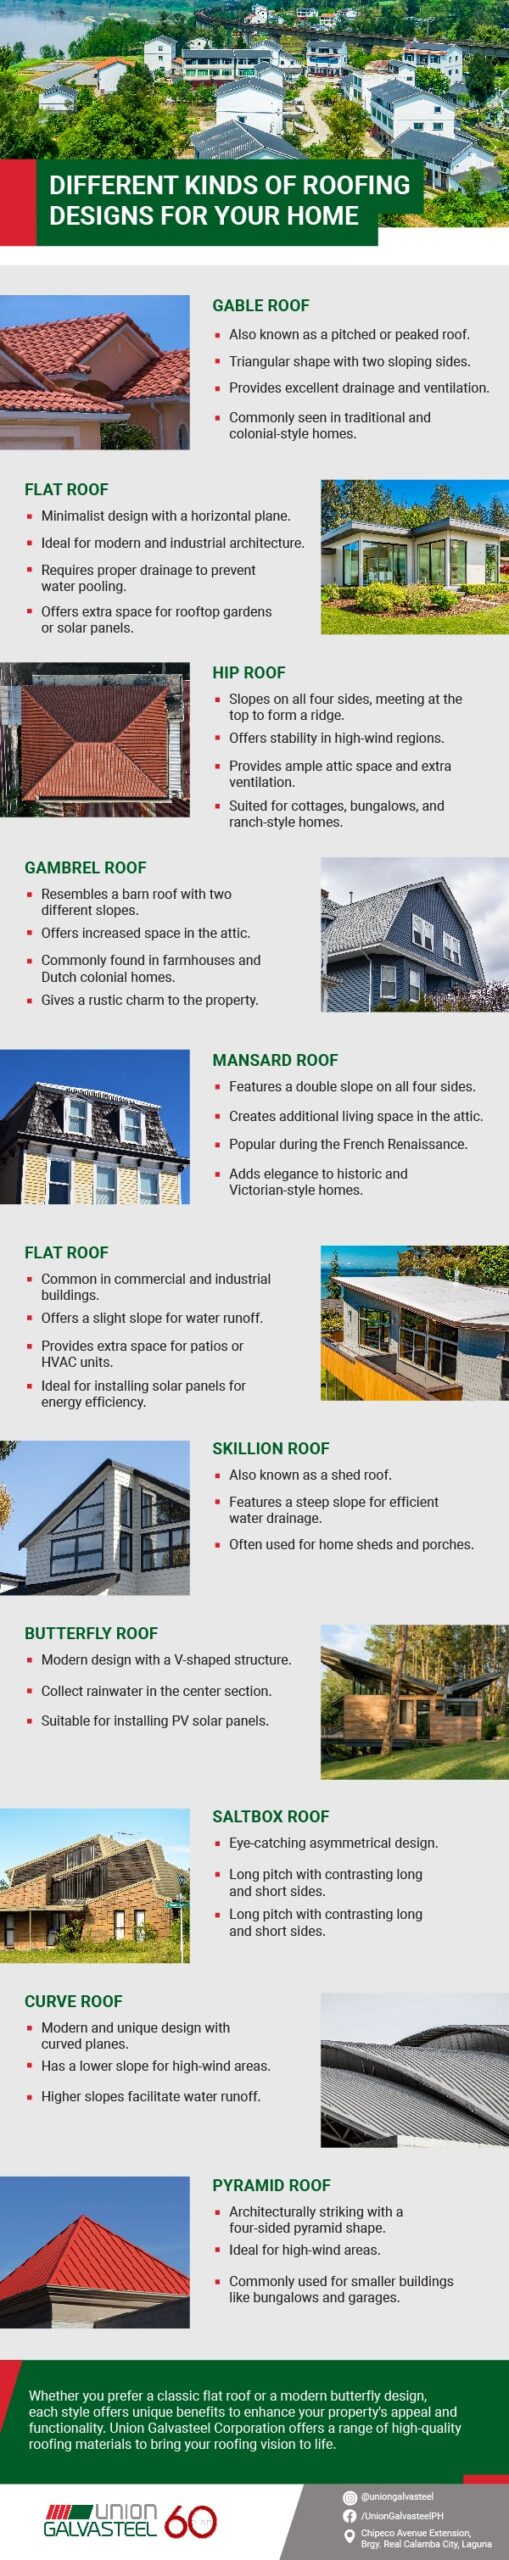 Infographic about different types of roofing design 